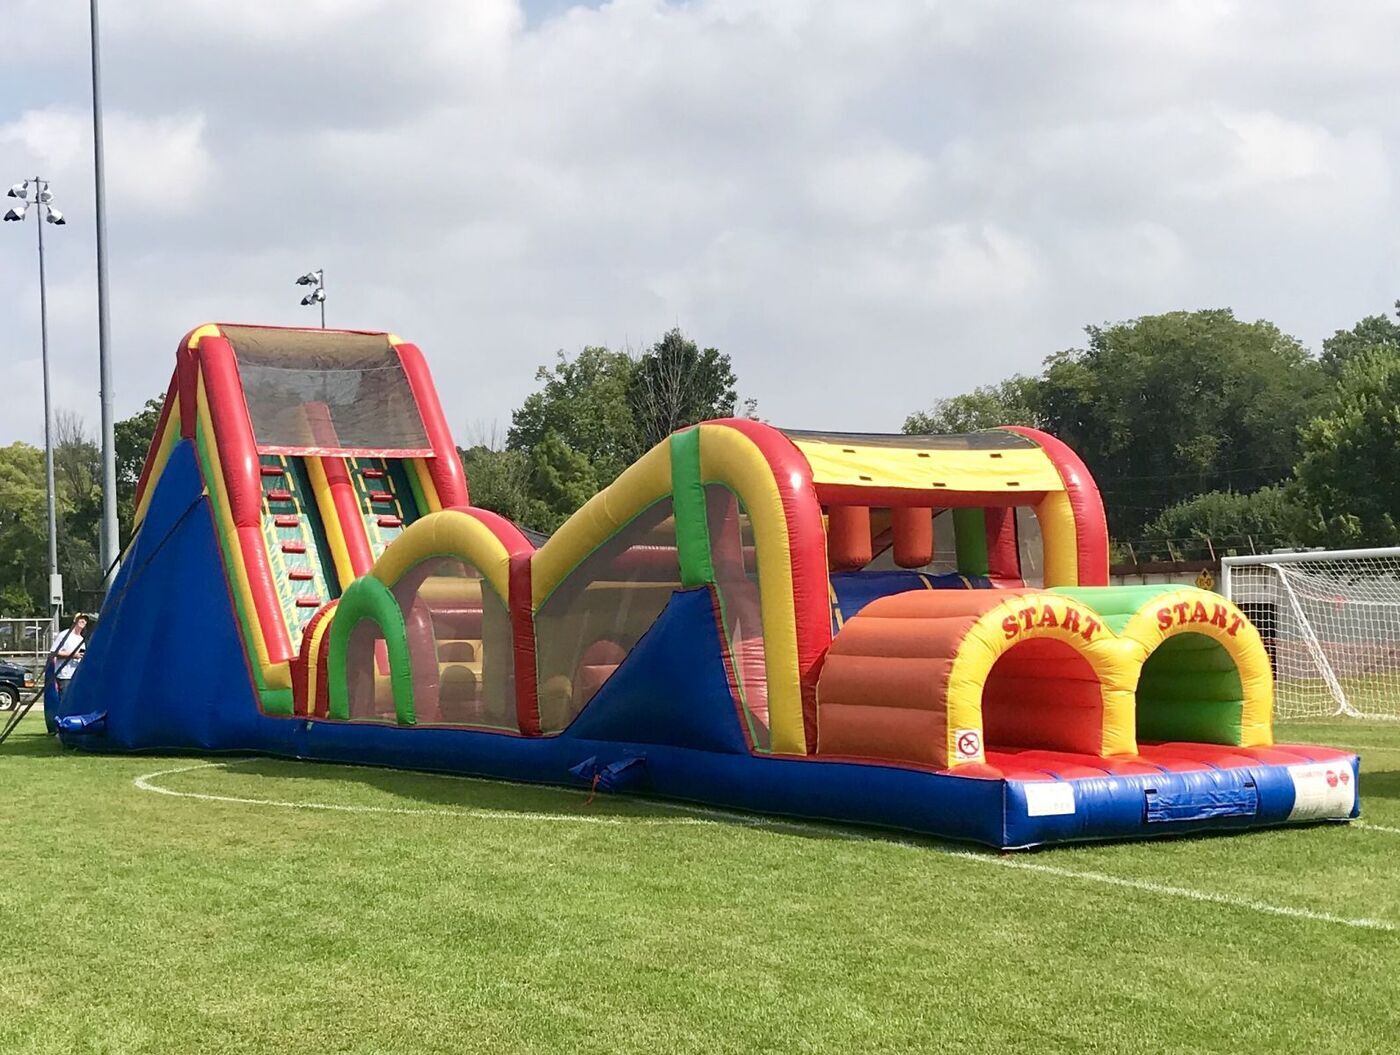 Bounce Houses R Us has been offering high-quality bounce house rentals and party rental equipment in Chicagoland